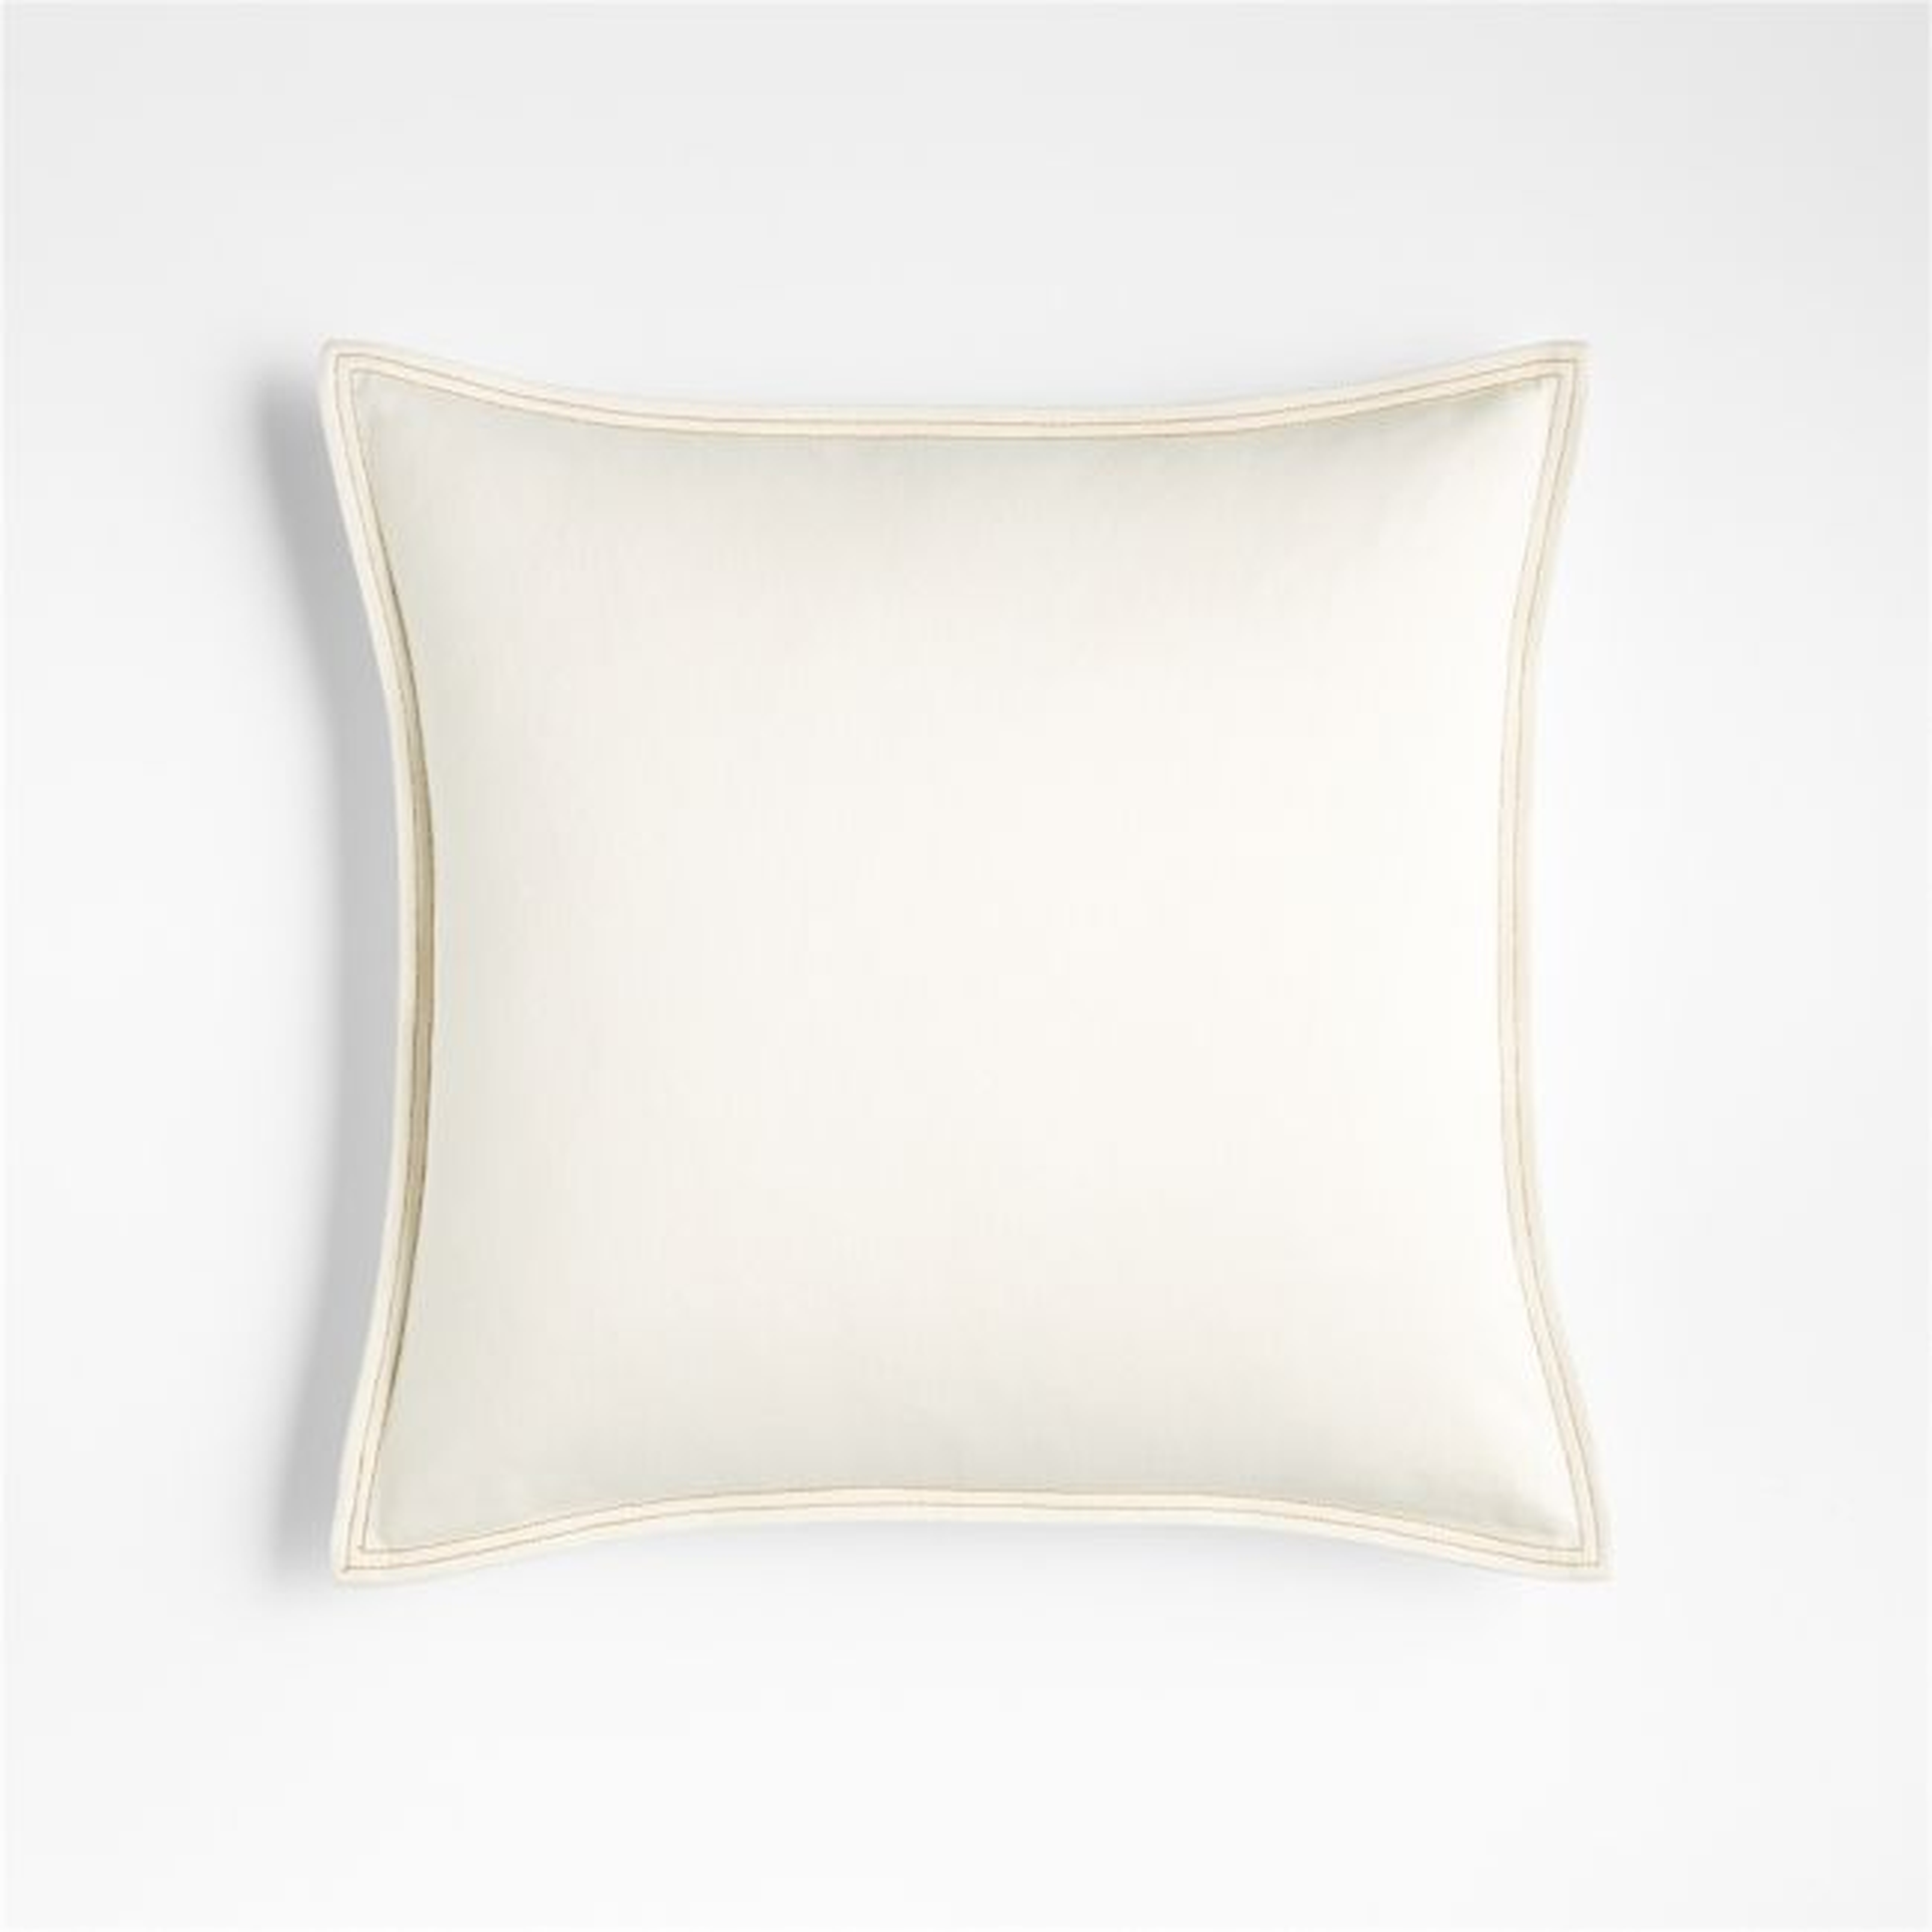 Blanca Denim Pillow Cover with Feather-Down Insert, White, 18" x 18" - Crate and Barrel